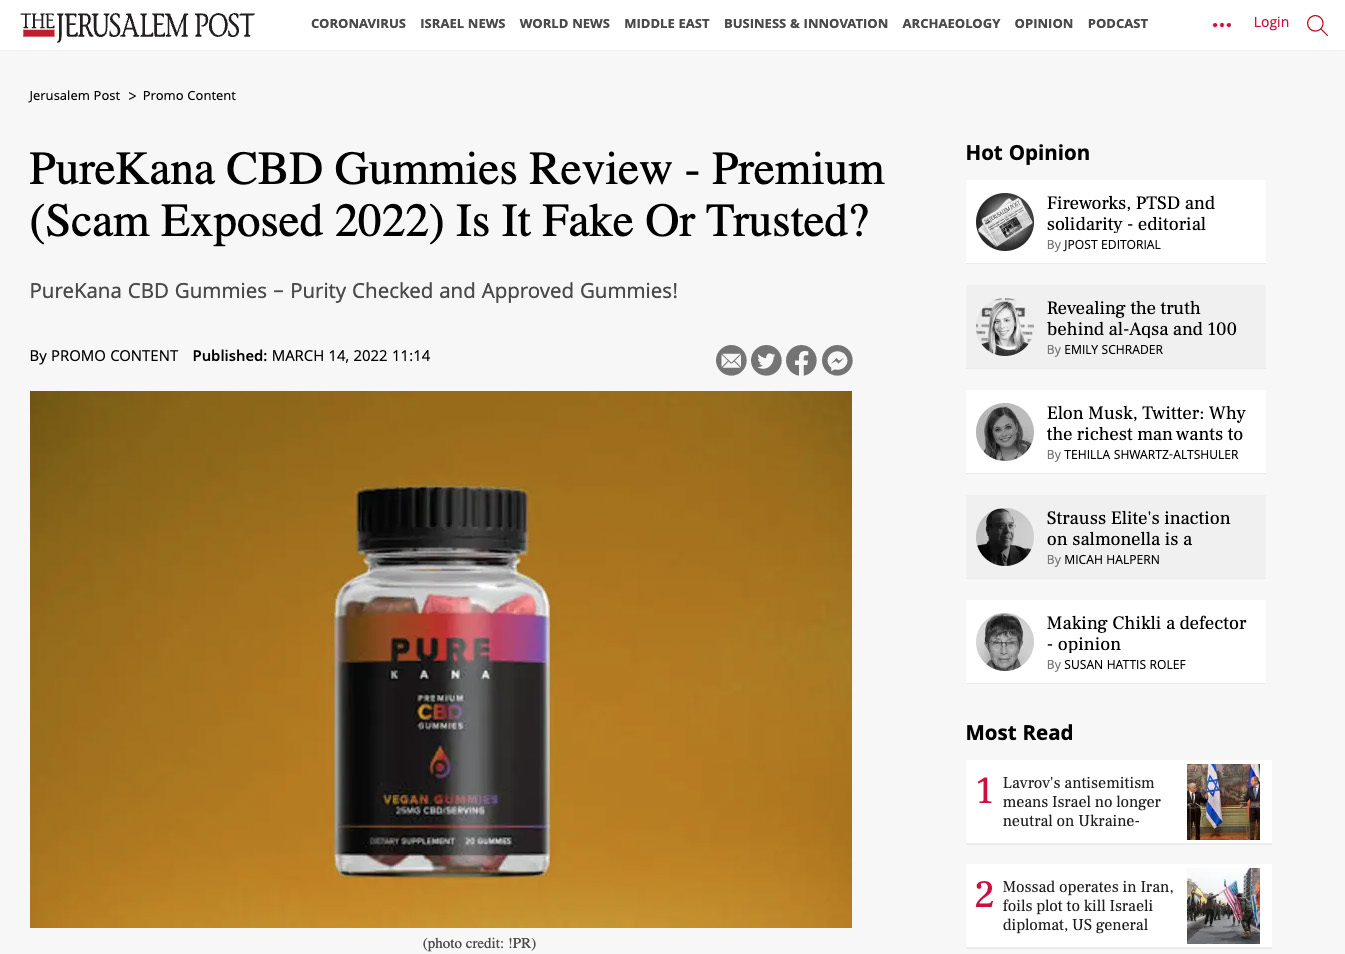 PureKana CBD Gummies reviews are all over Google but they are little more than sponsored content articles and some include scammy language.